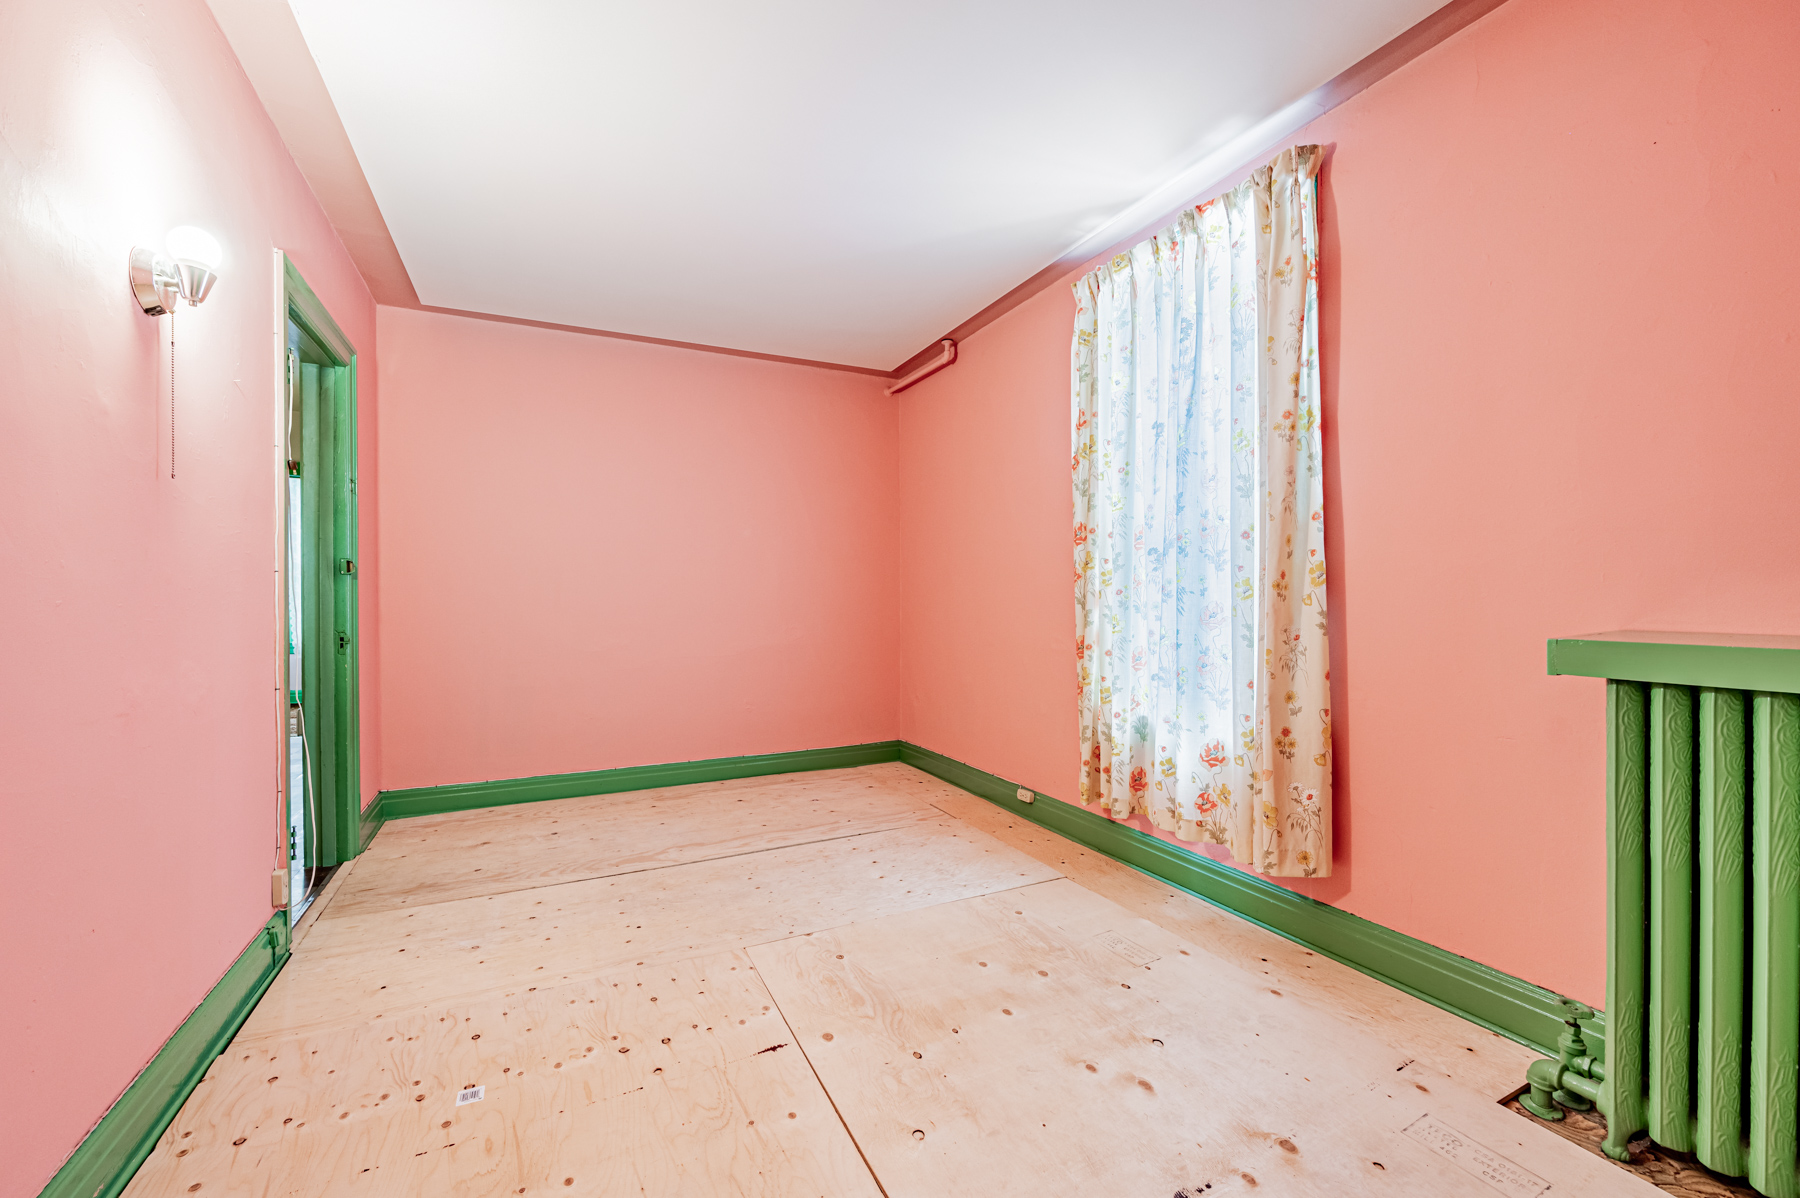 Pink walled bedroom with plywood floors and curtained window – 27 Granby St.